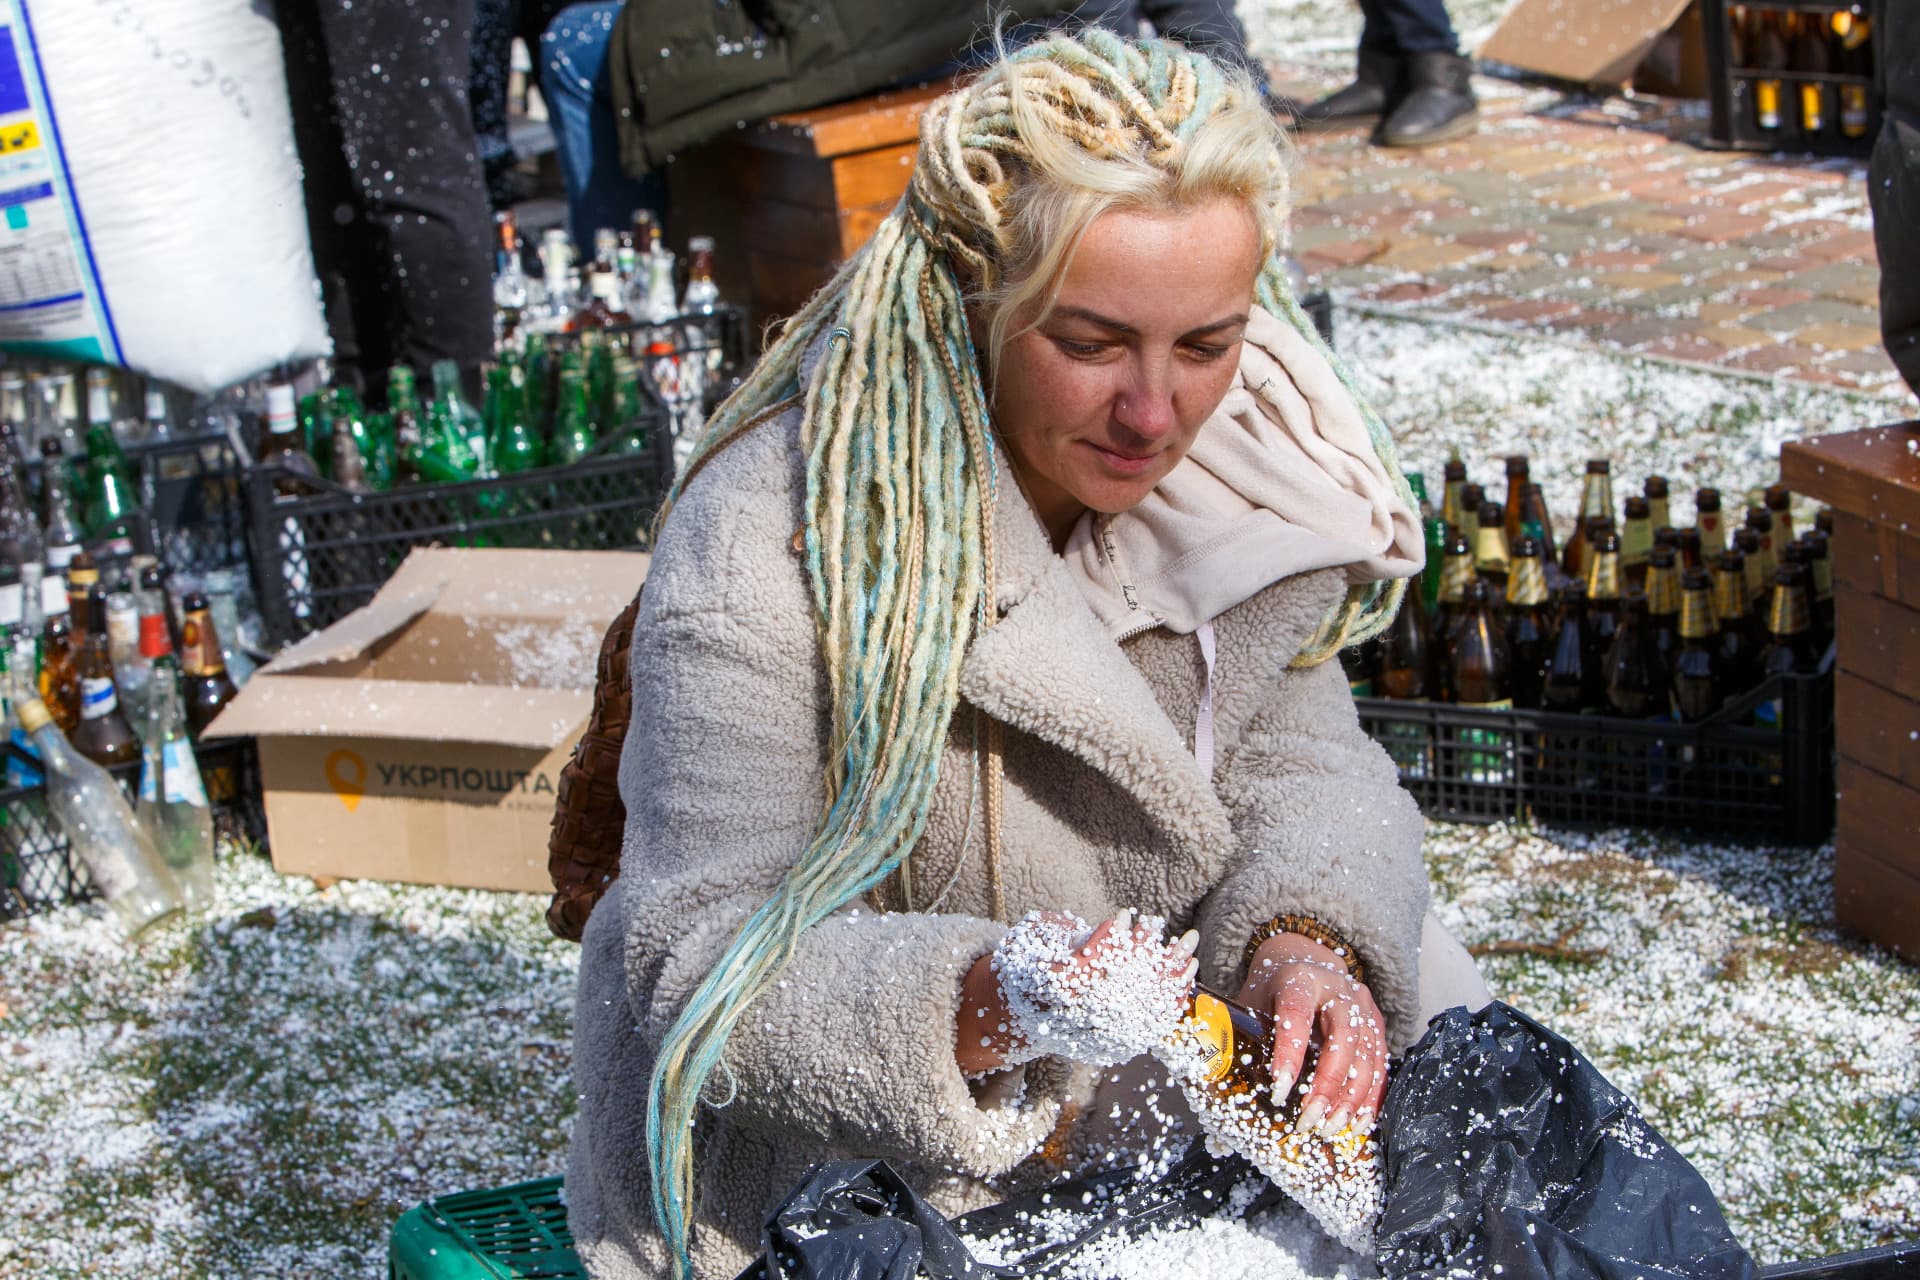 A woman adds foam plastic during an effort of making Molotov cocktails